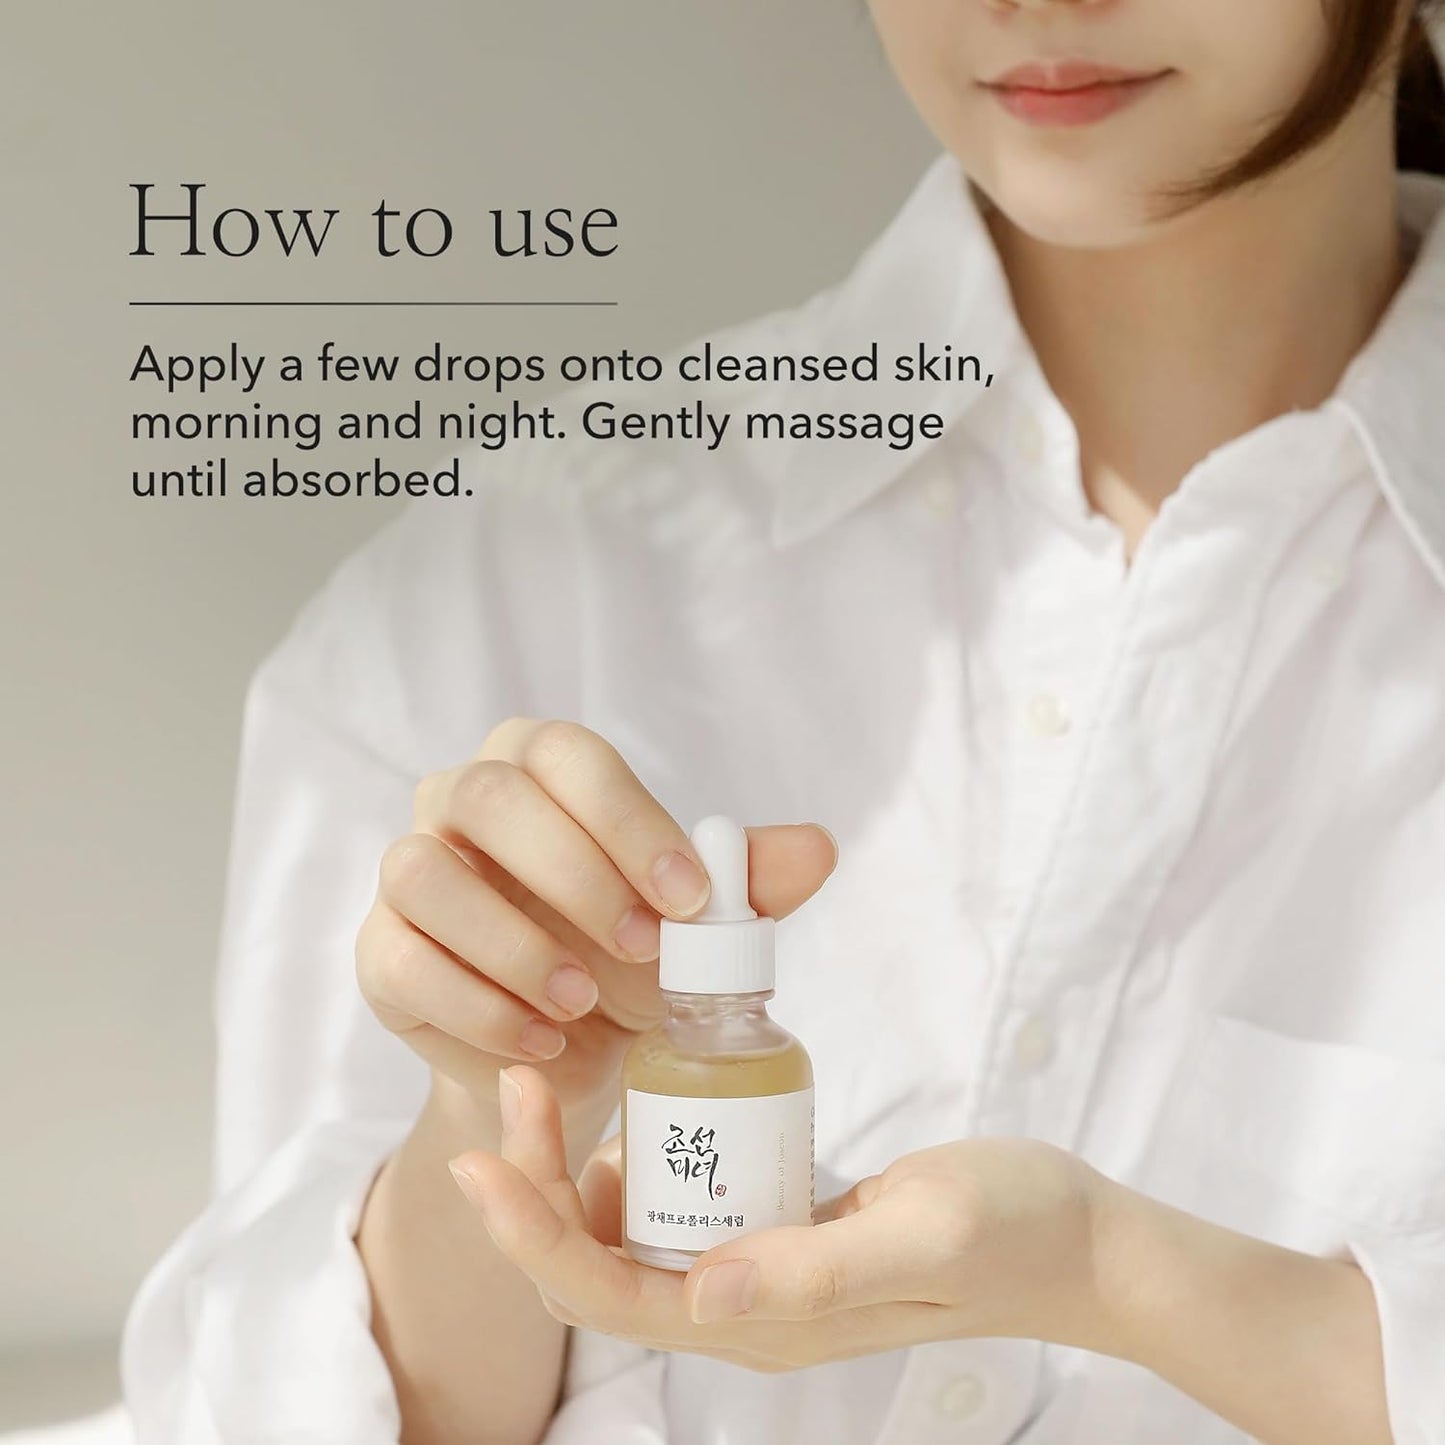 Beauty of Joseon Glow Serum with Propolis and Niacinamide - Hydrating, Soothing Solution for Uneven Skin Tone in Korean Skincare